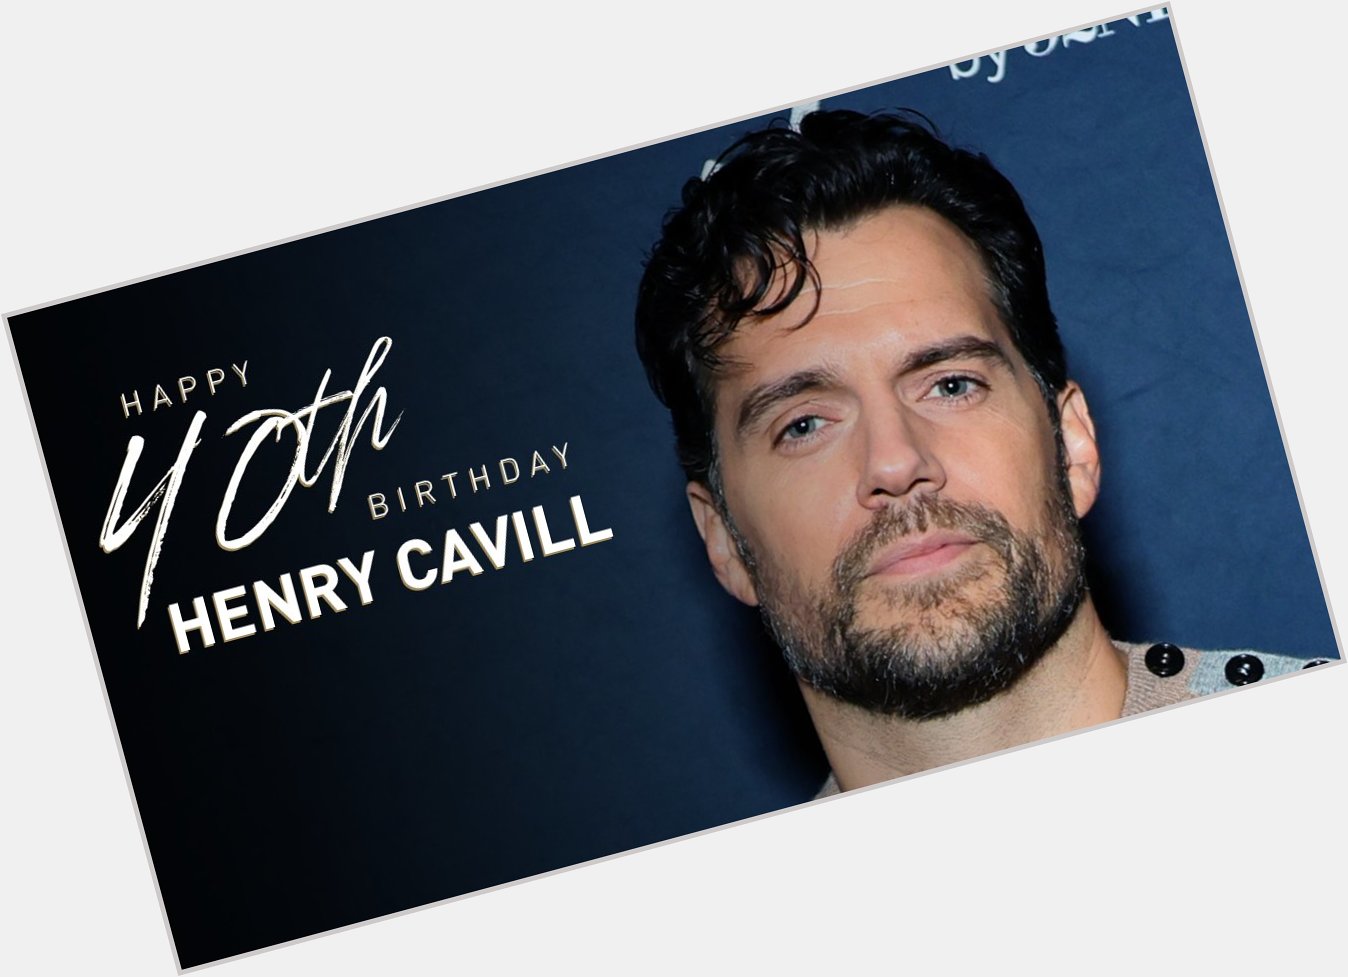 Happy 40th birthday Henry Cavill! Watch his tribute:  